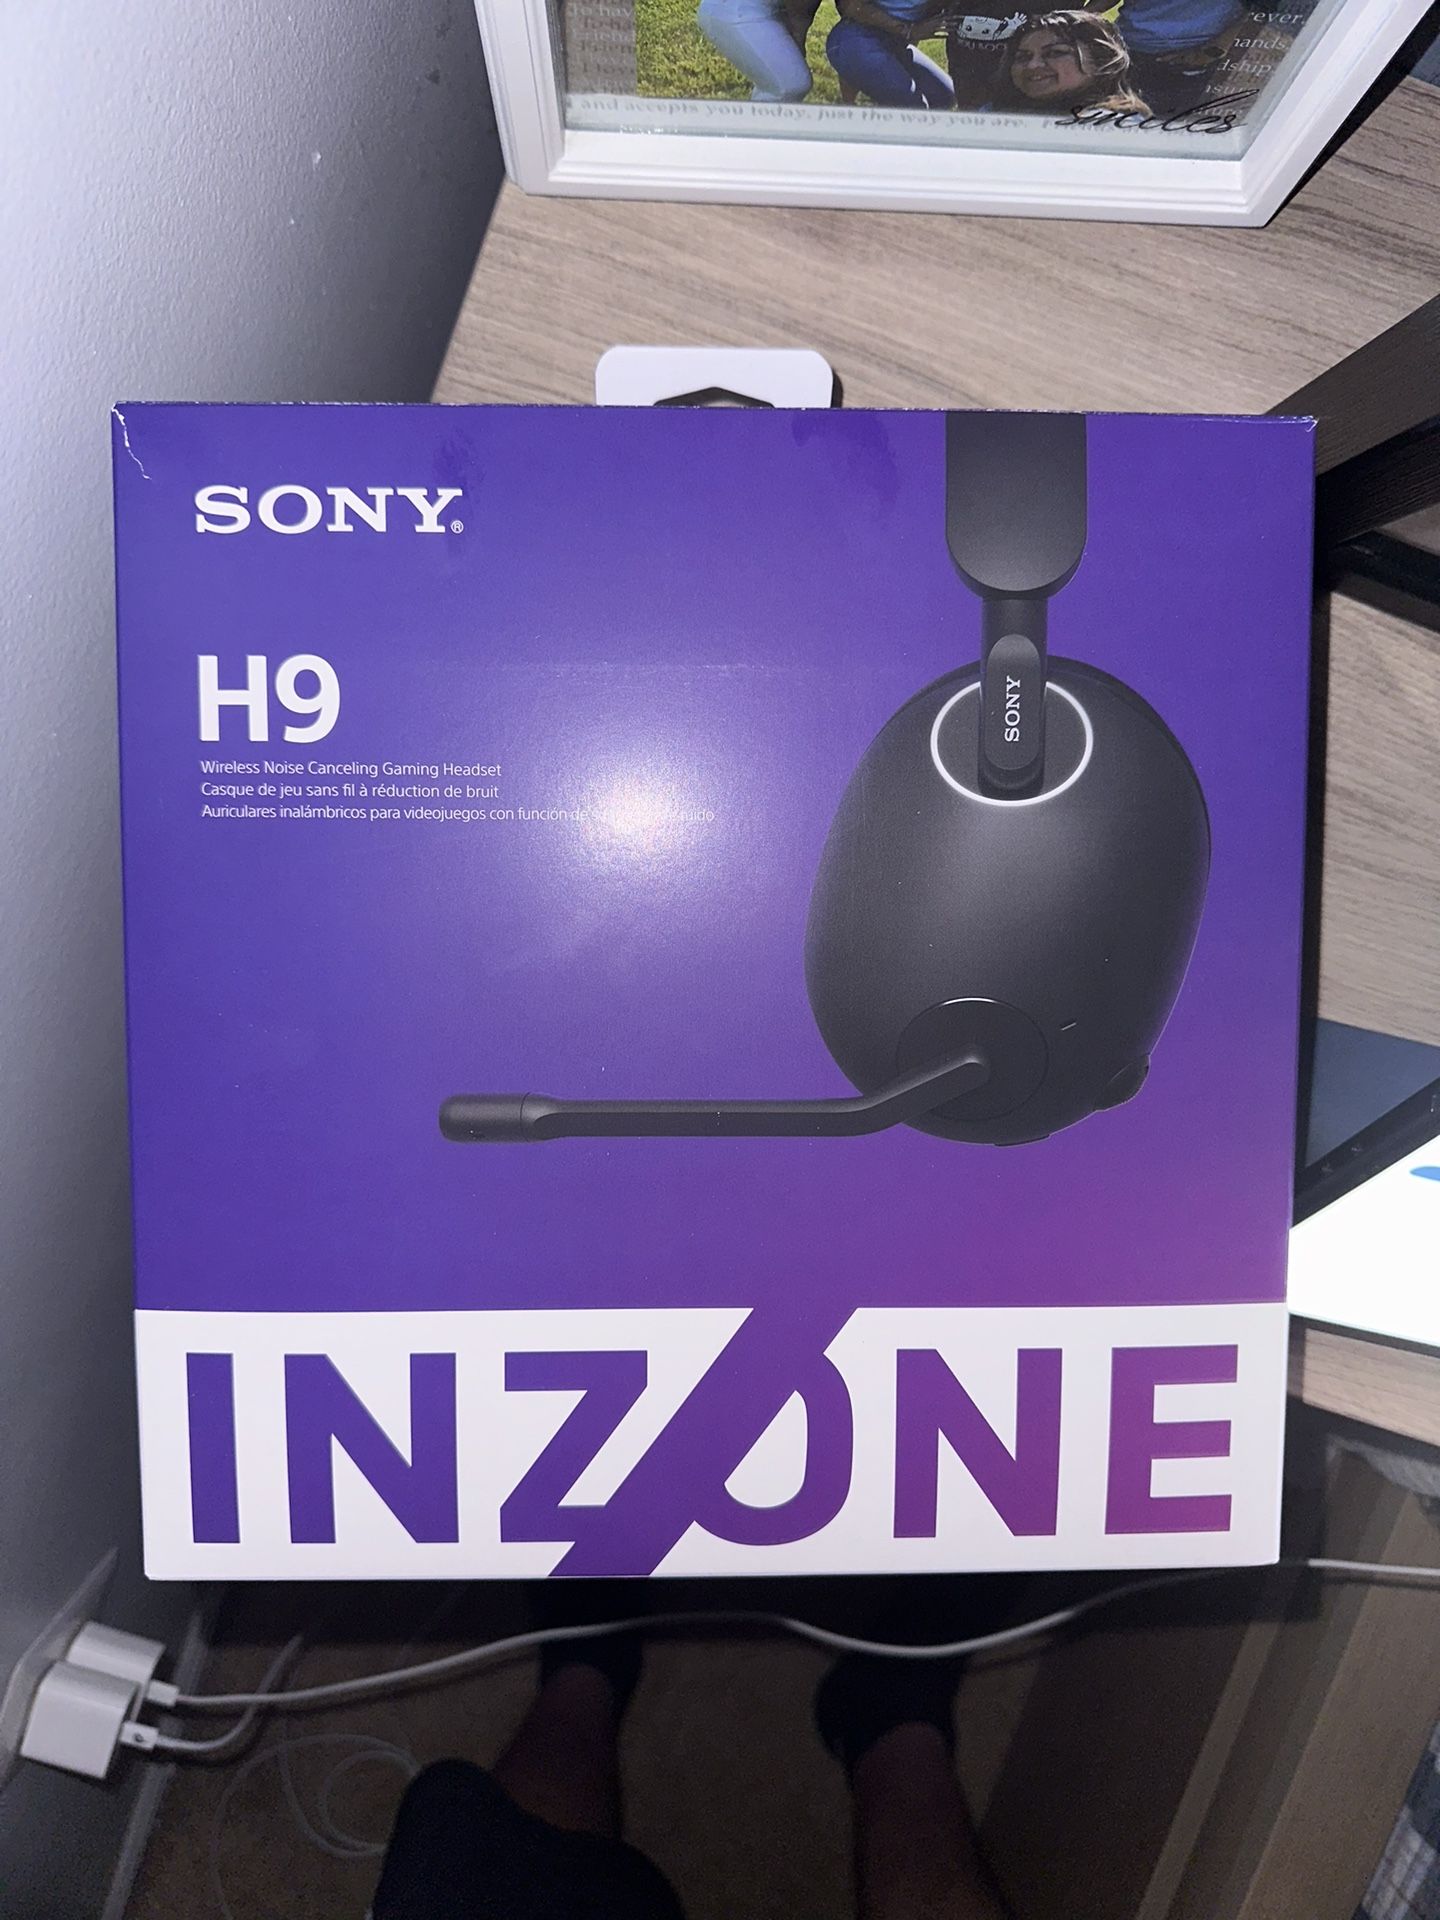 Brand New SONY INZONE H9 Wireless Noise Canceling Gaming Headset For PC/PS5